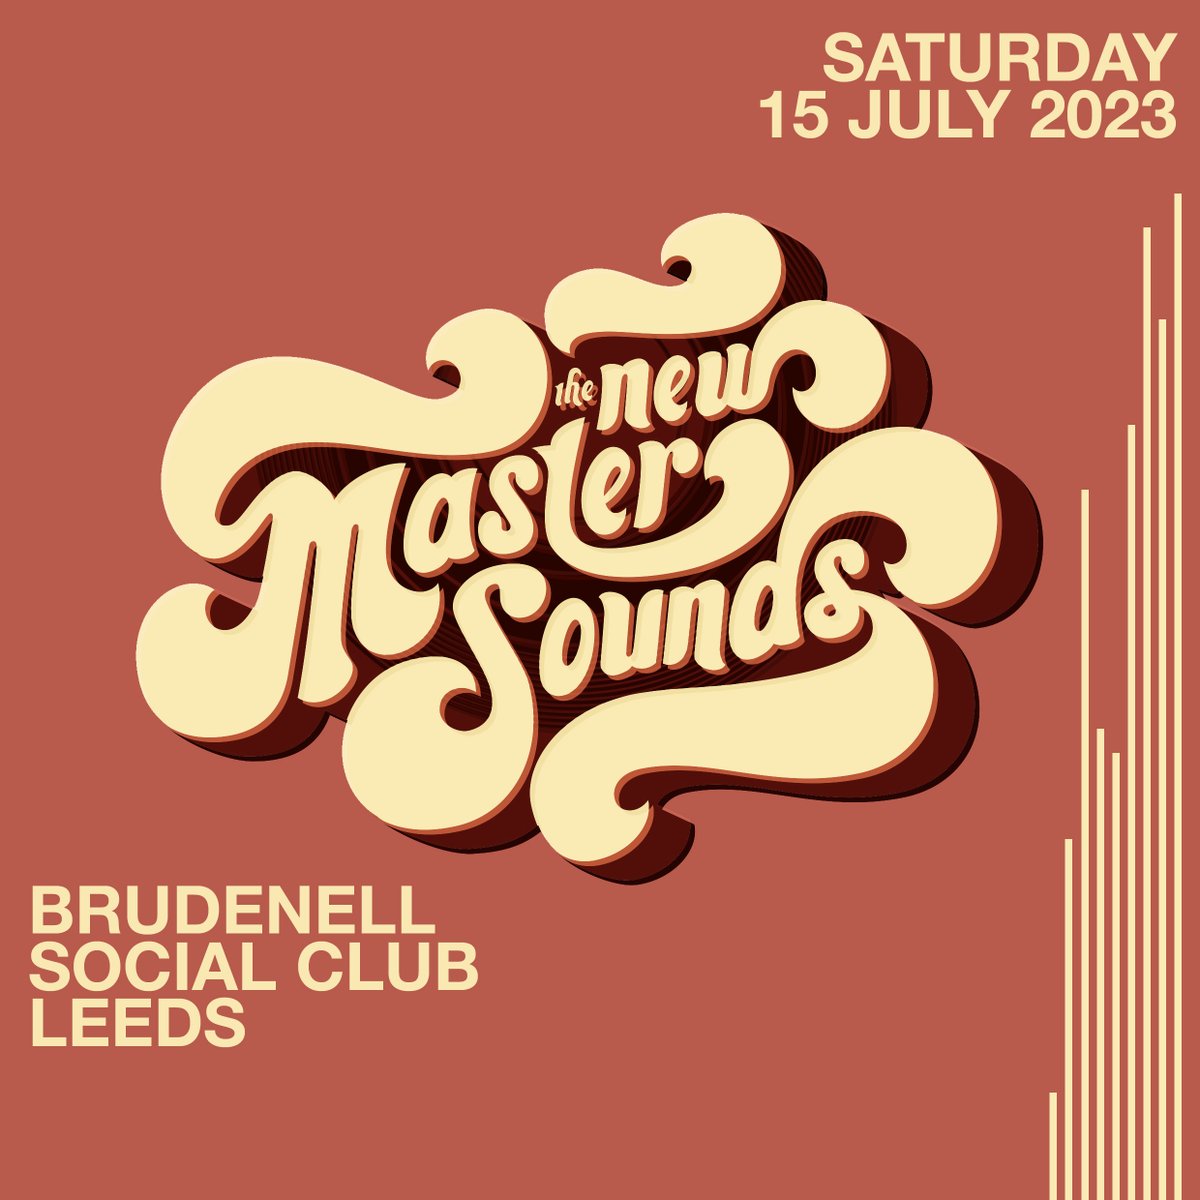 🕺 THE FUNK IS BACK. 🕺 @NewMastersounds return this July following a stunning show last October.🙌 If you were there - you know how good this will be. If you weren't, why not find out? Tickets can be found below.👇 ➡️ bit.ly/TNMS-Lds